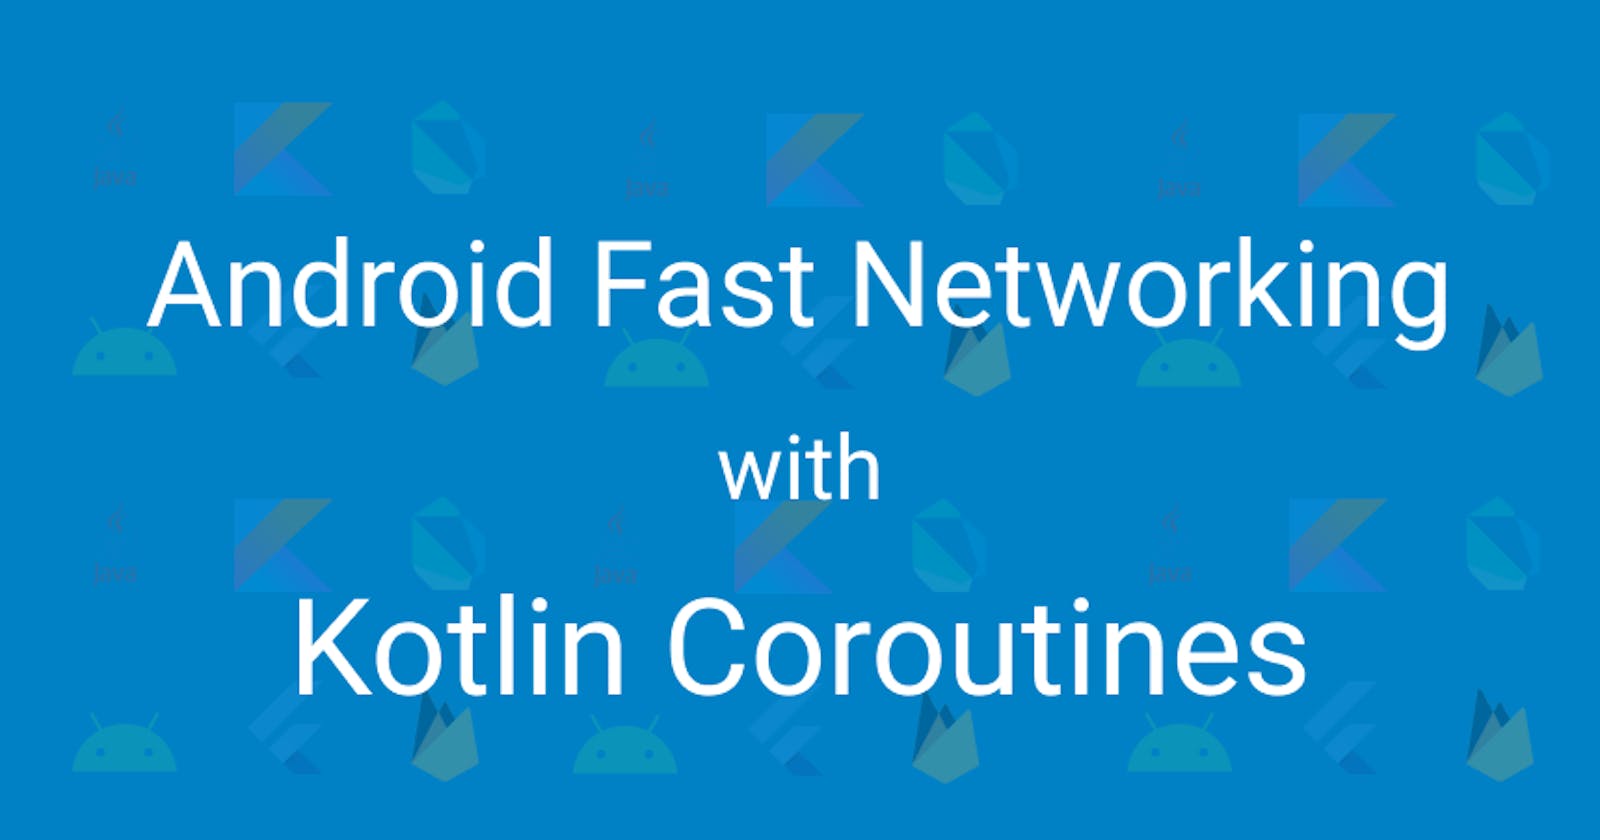 Android Fast Networking with Kotlin Coroutines